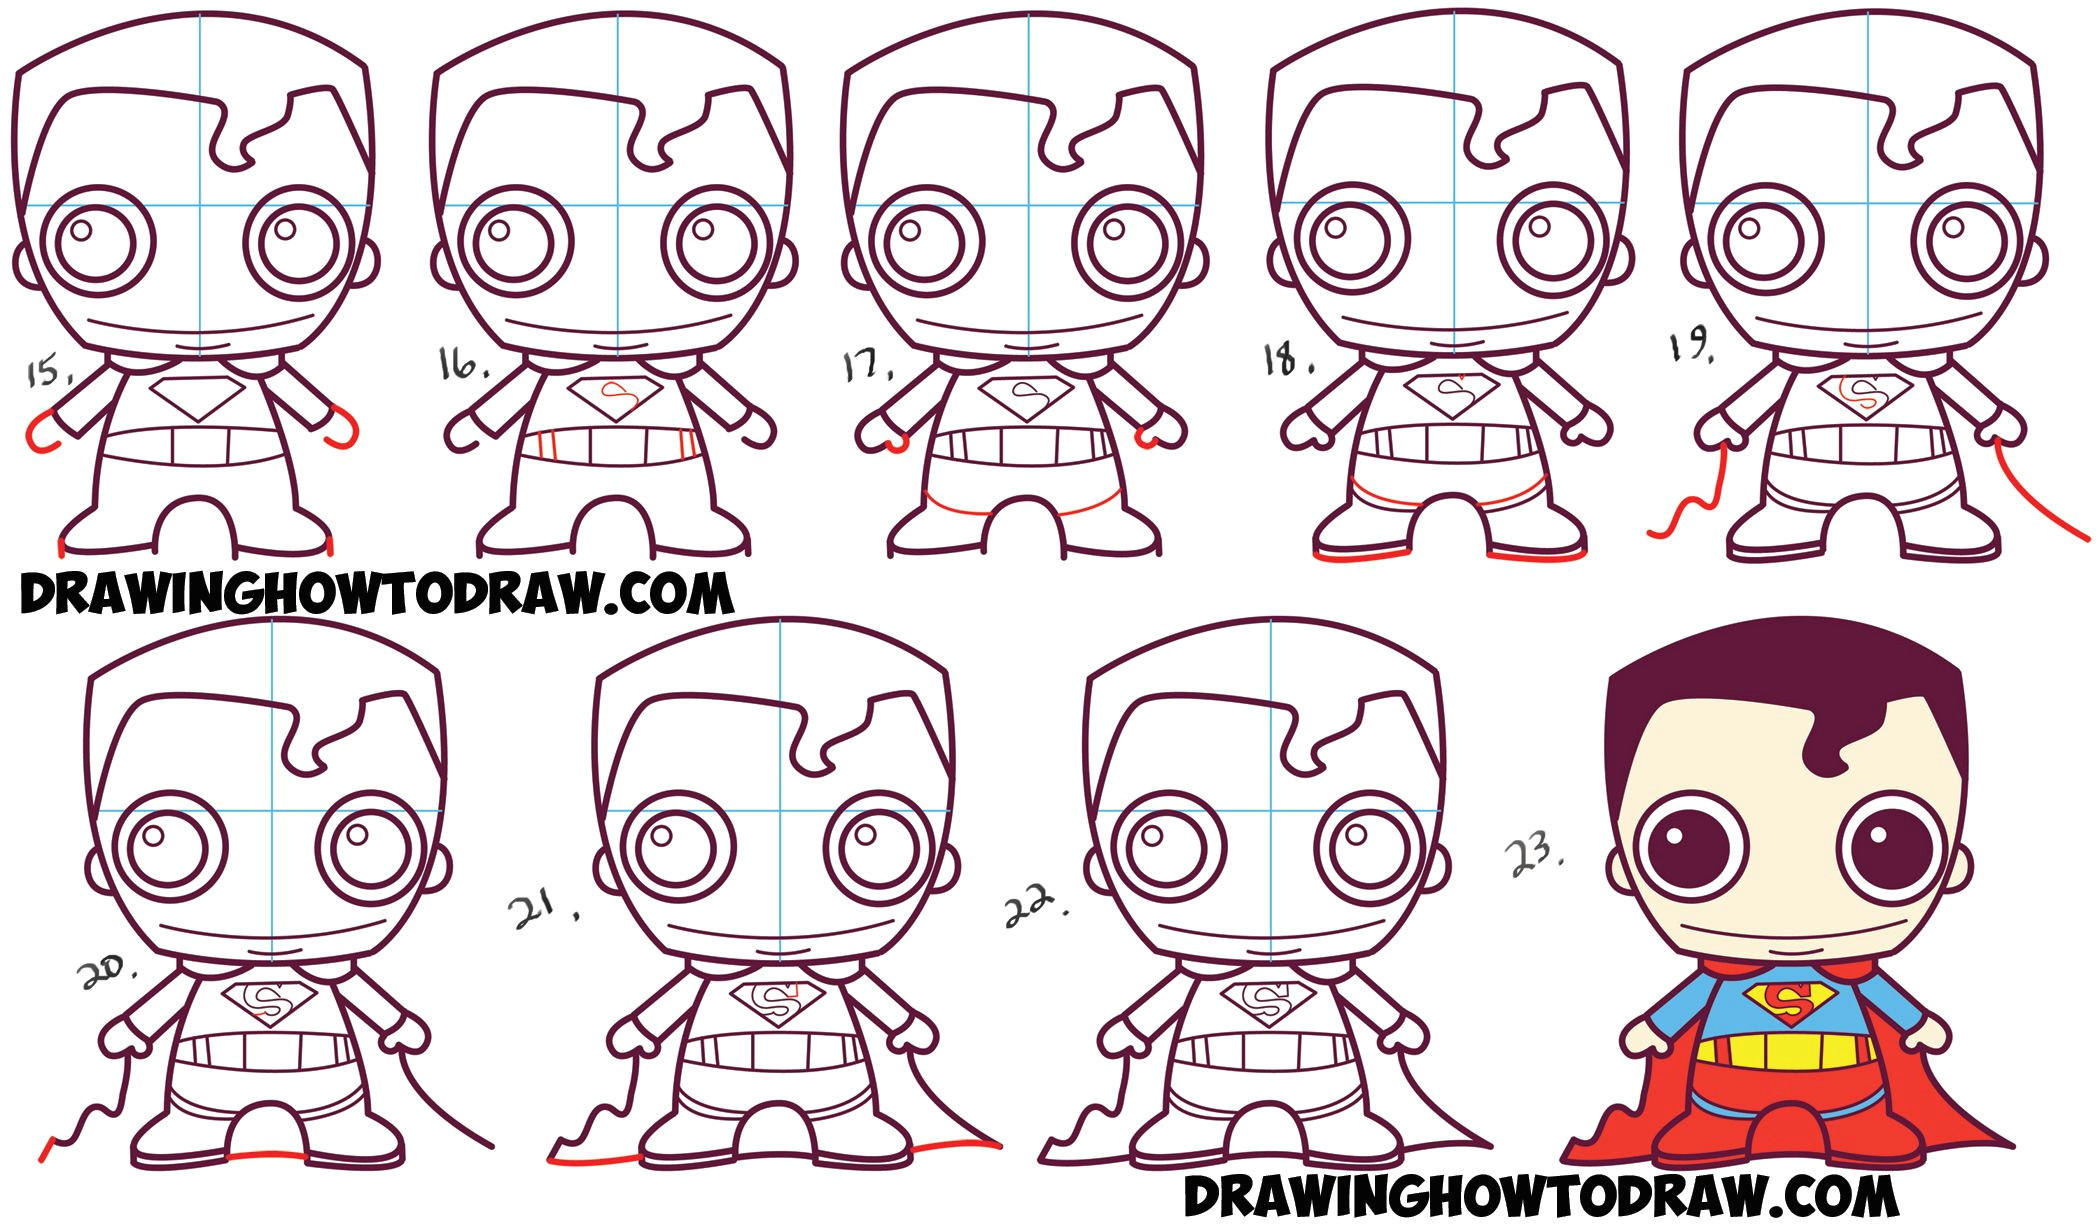 Drawing Cartoons Chibi How to Draw Cute Chibi Superman From Dc Comics In Easy Step by Step